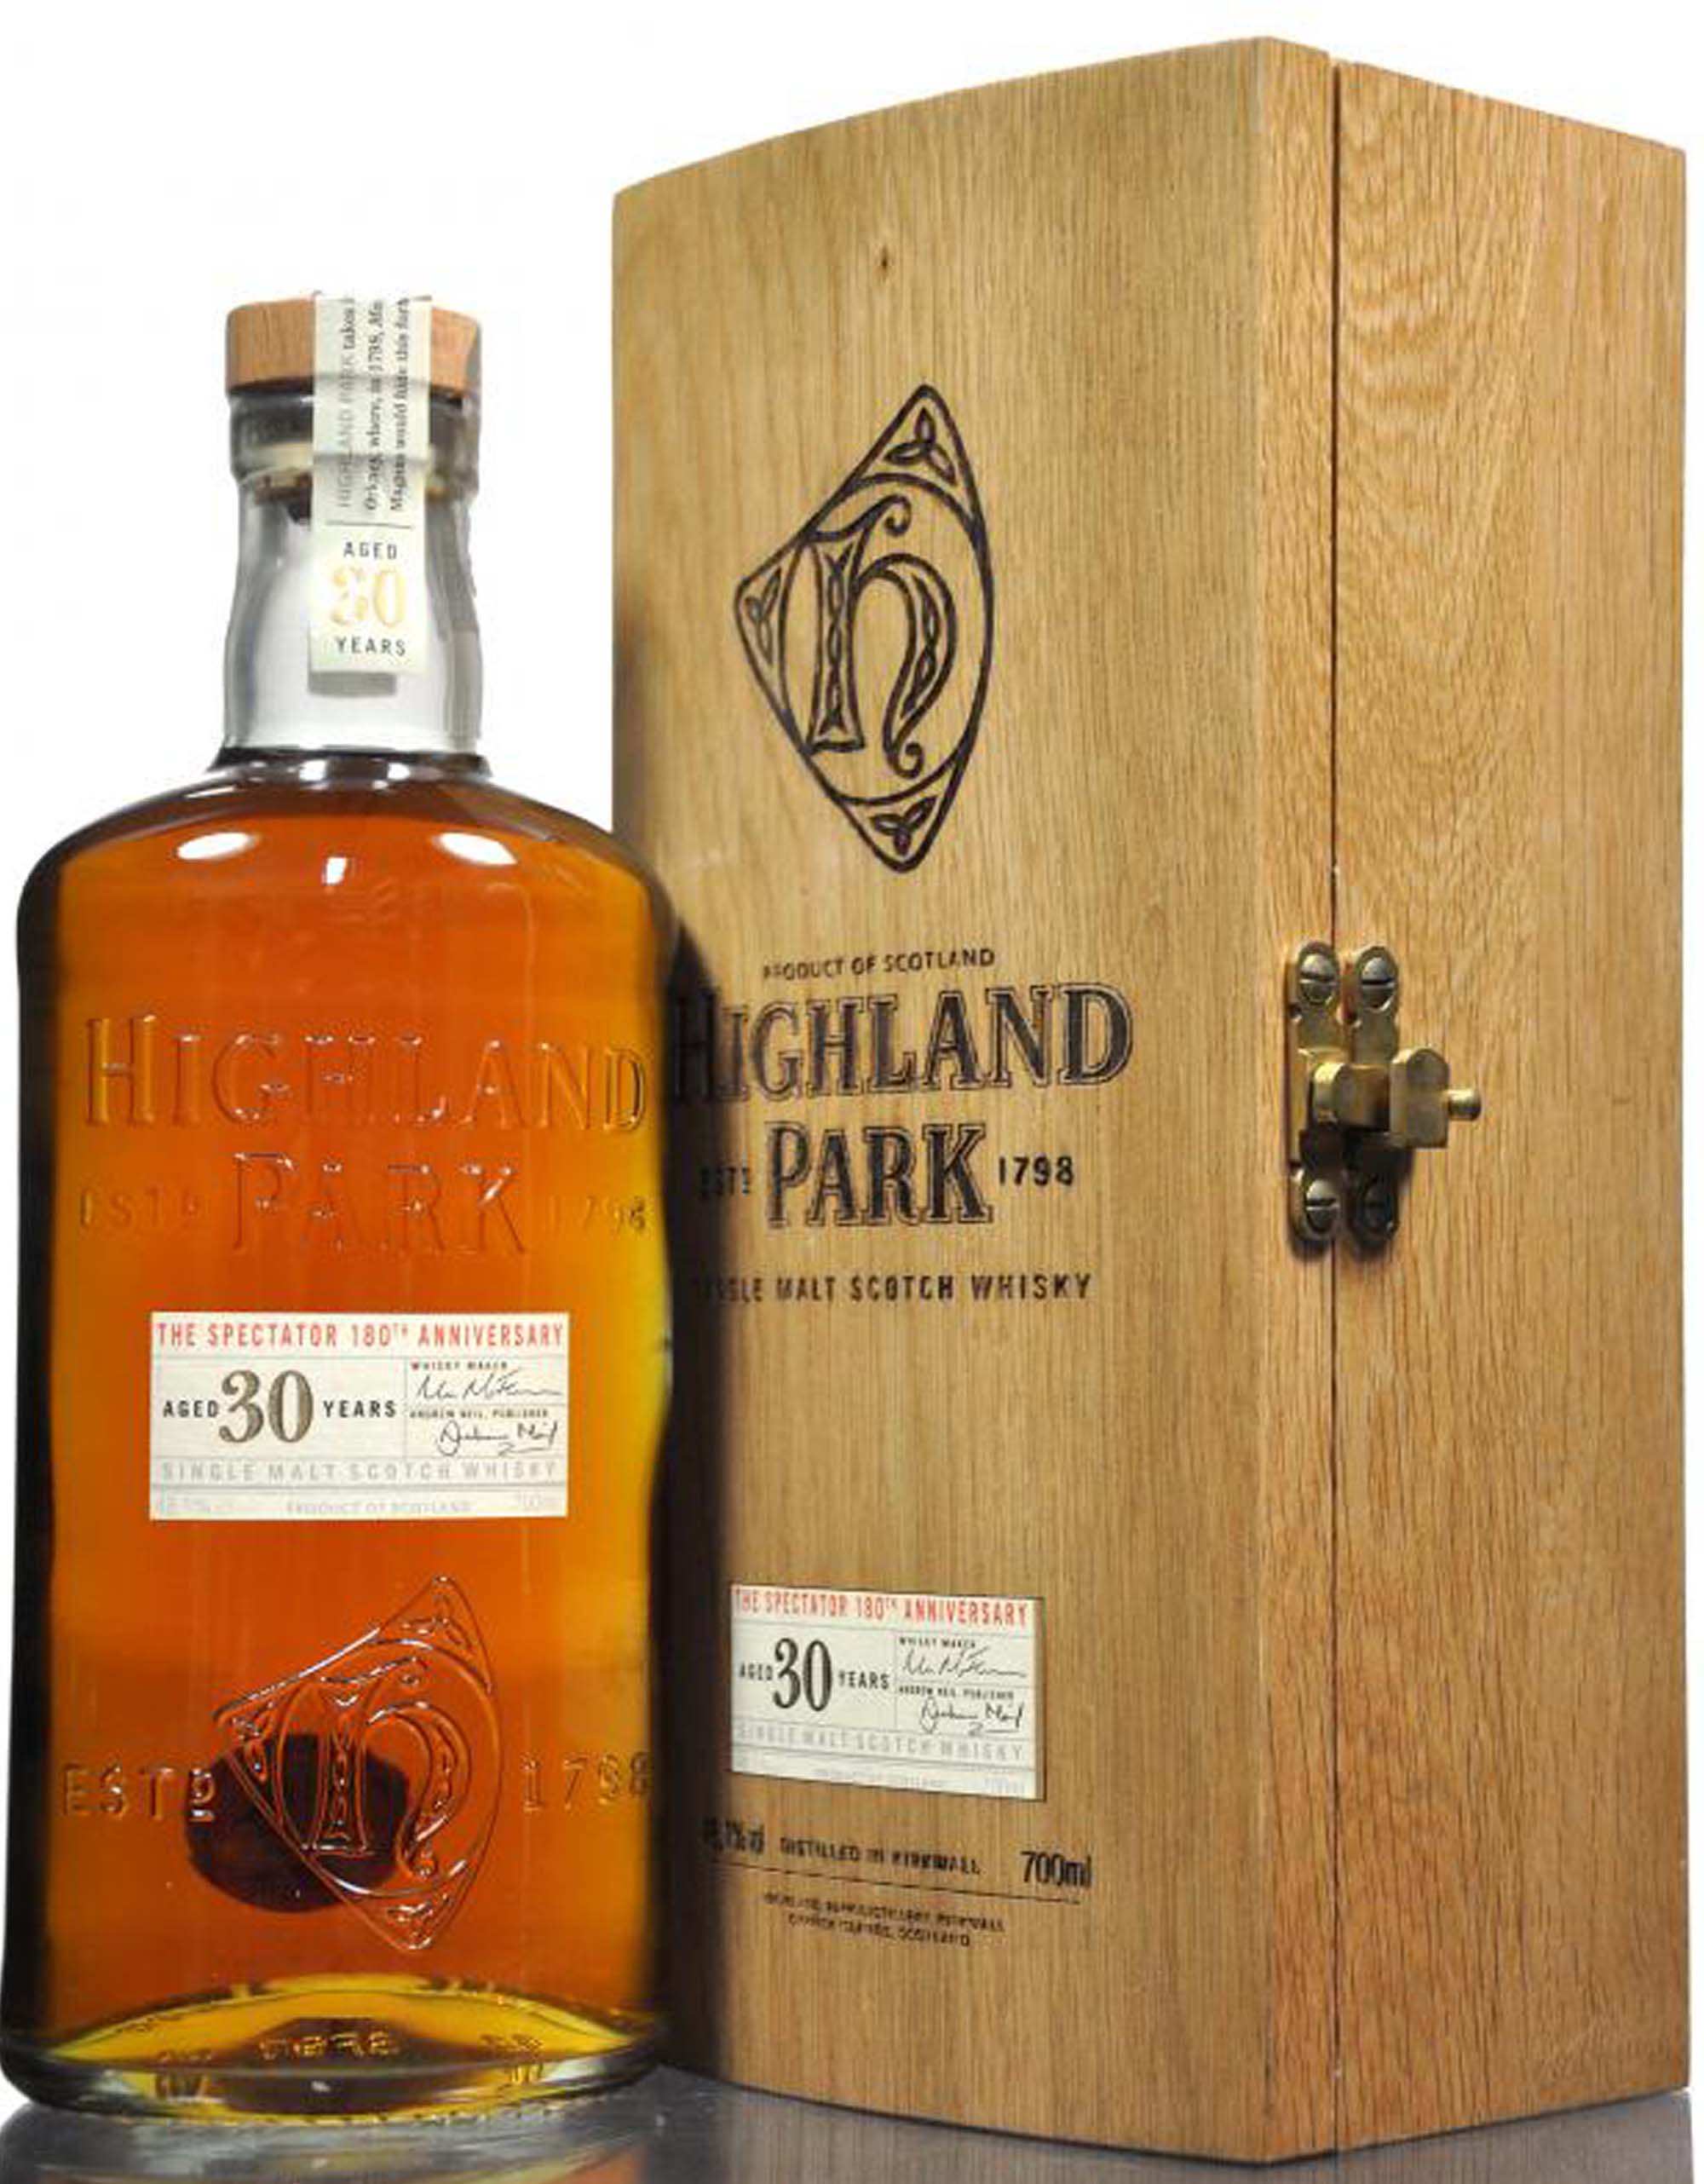 Highland Park 30 Year Old - Spectator 180th Anniversary